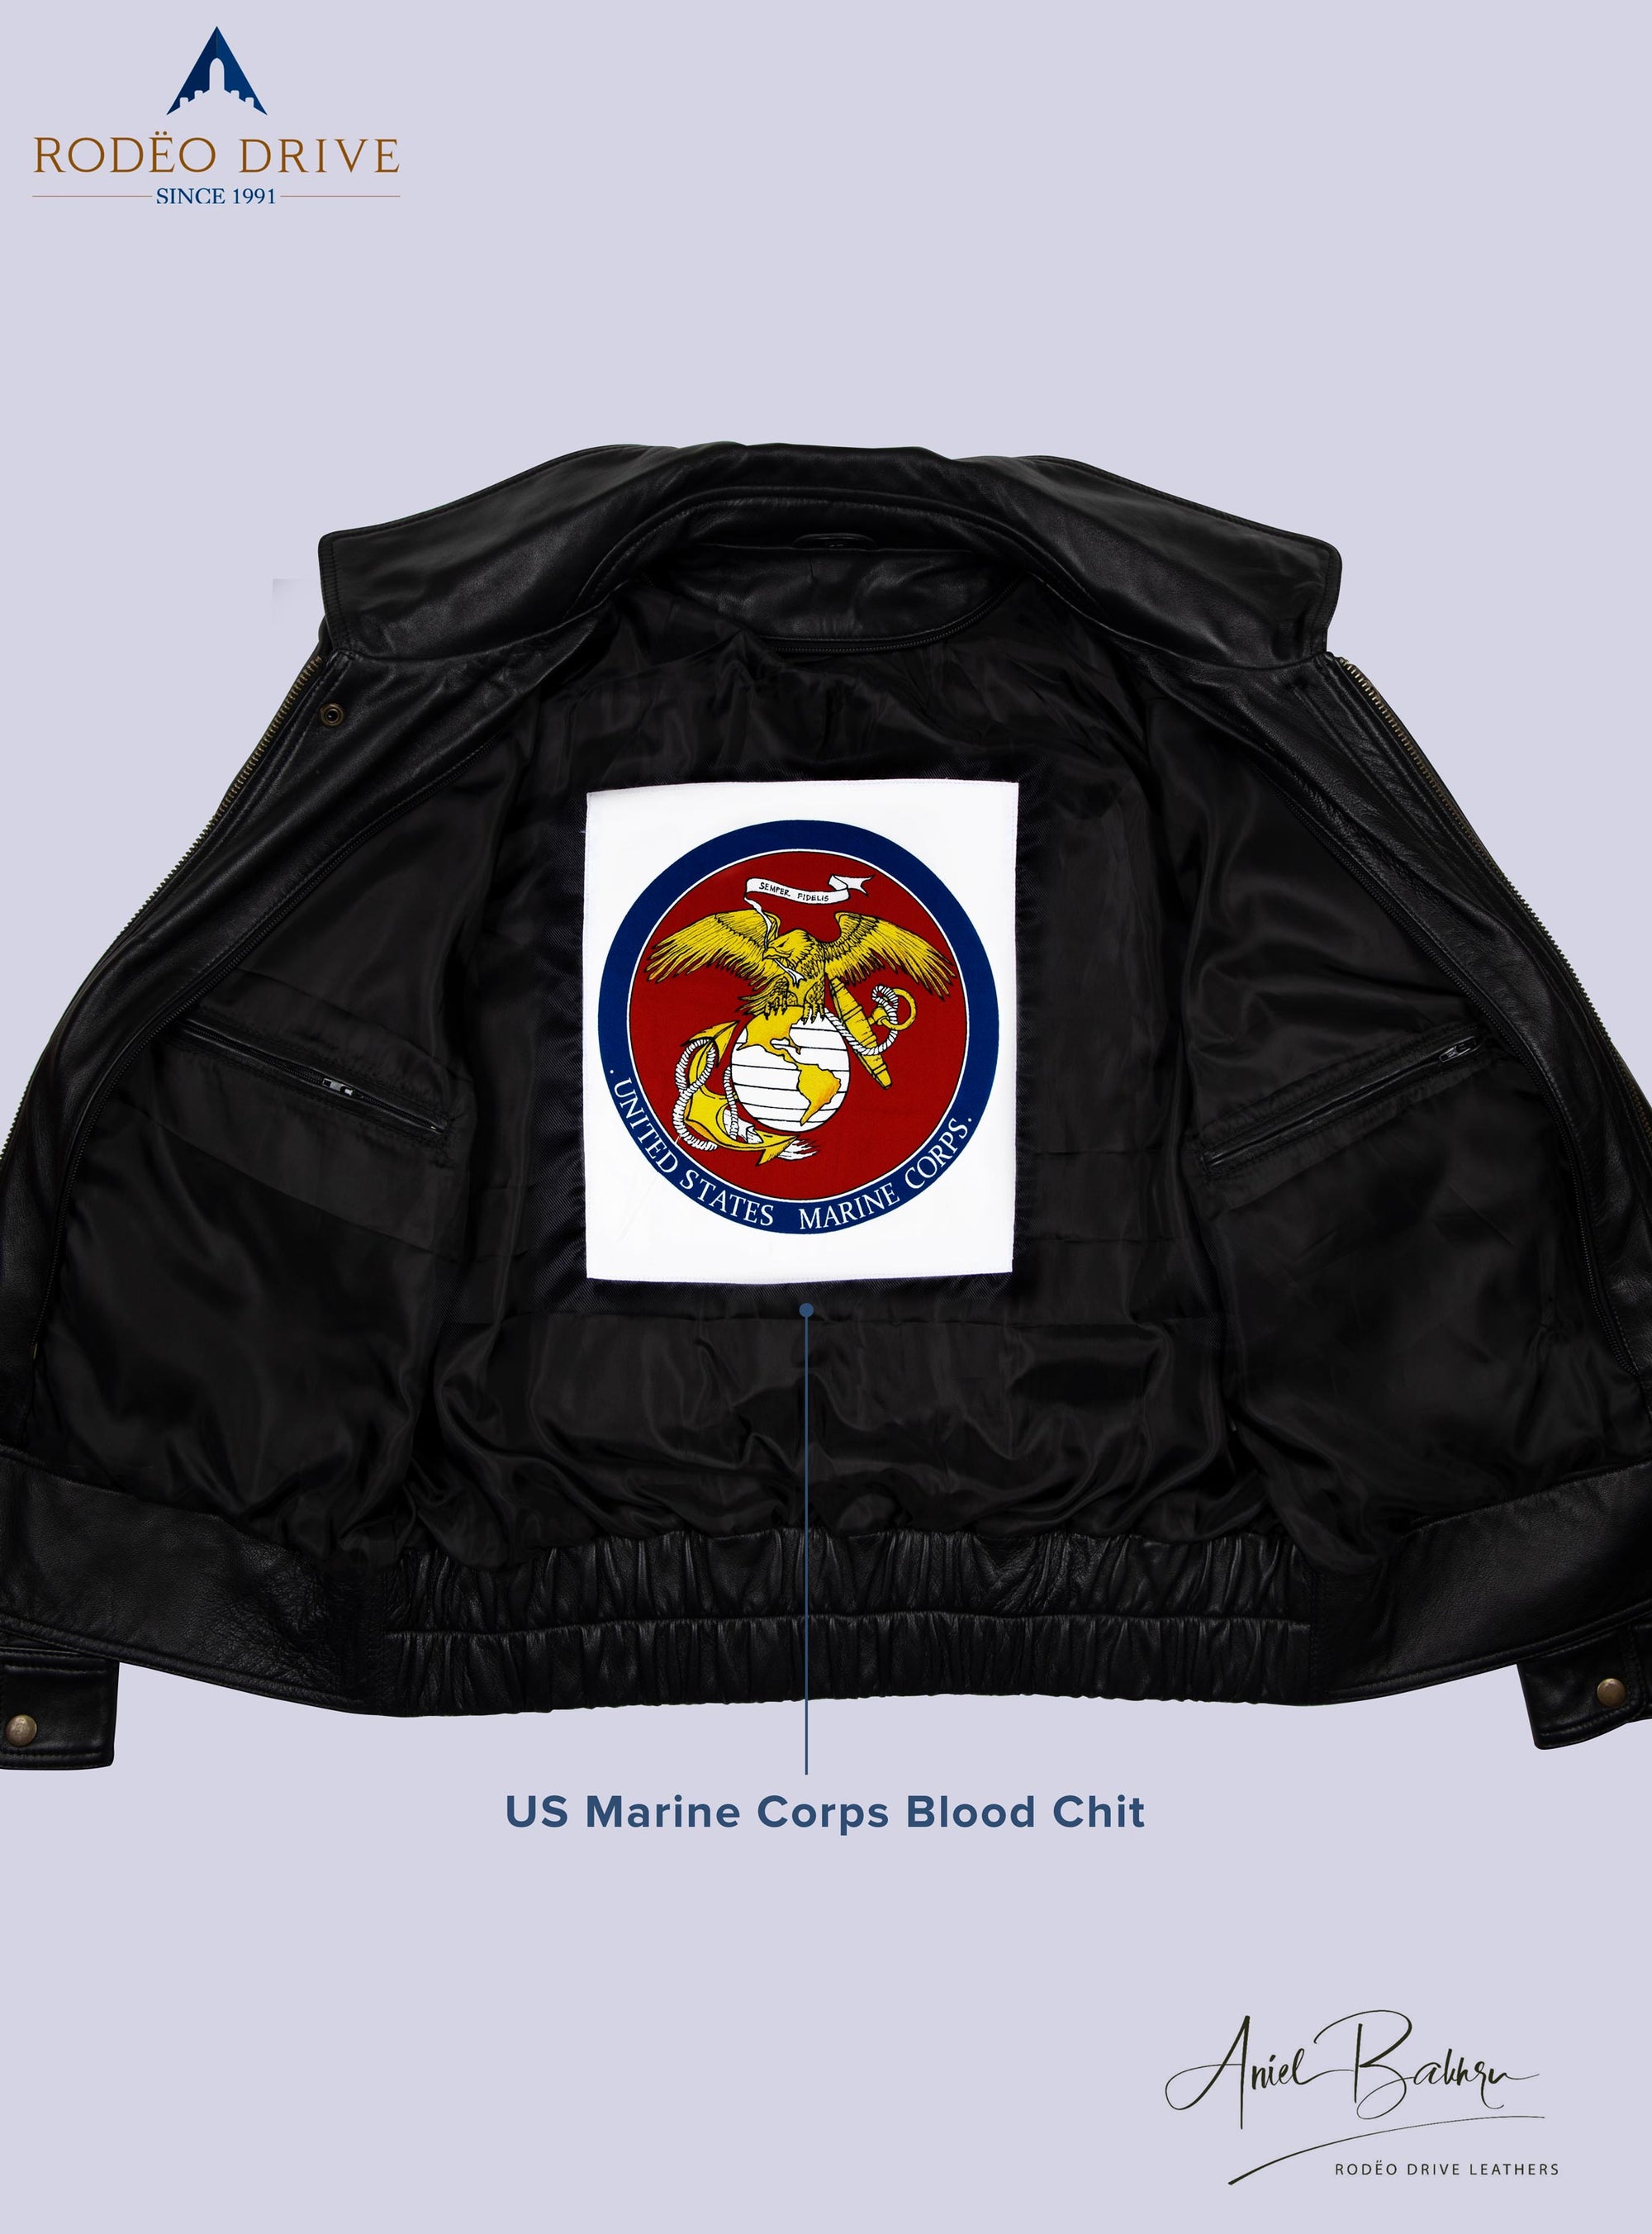 US Marine corps blood picture of All Airlines leather jacket for women.